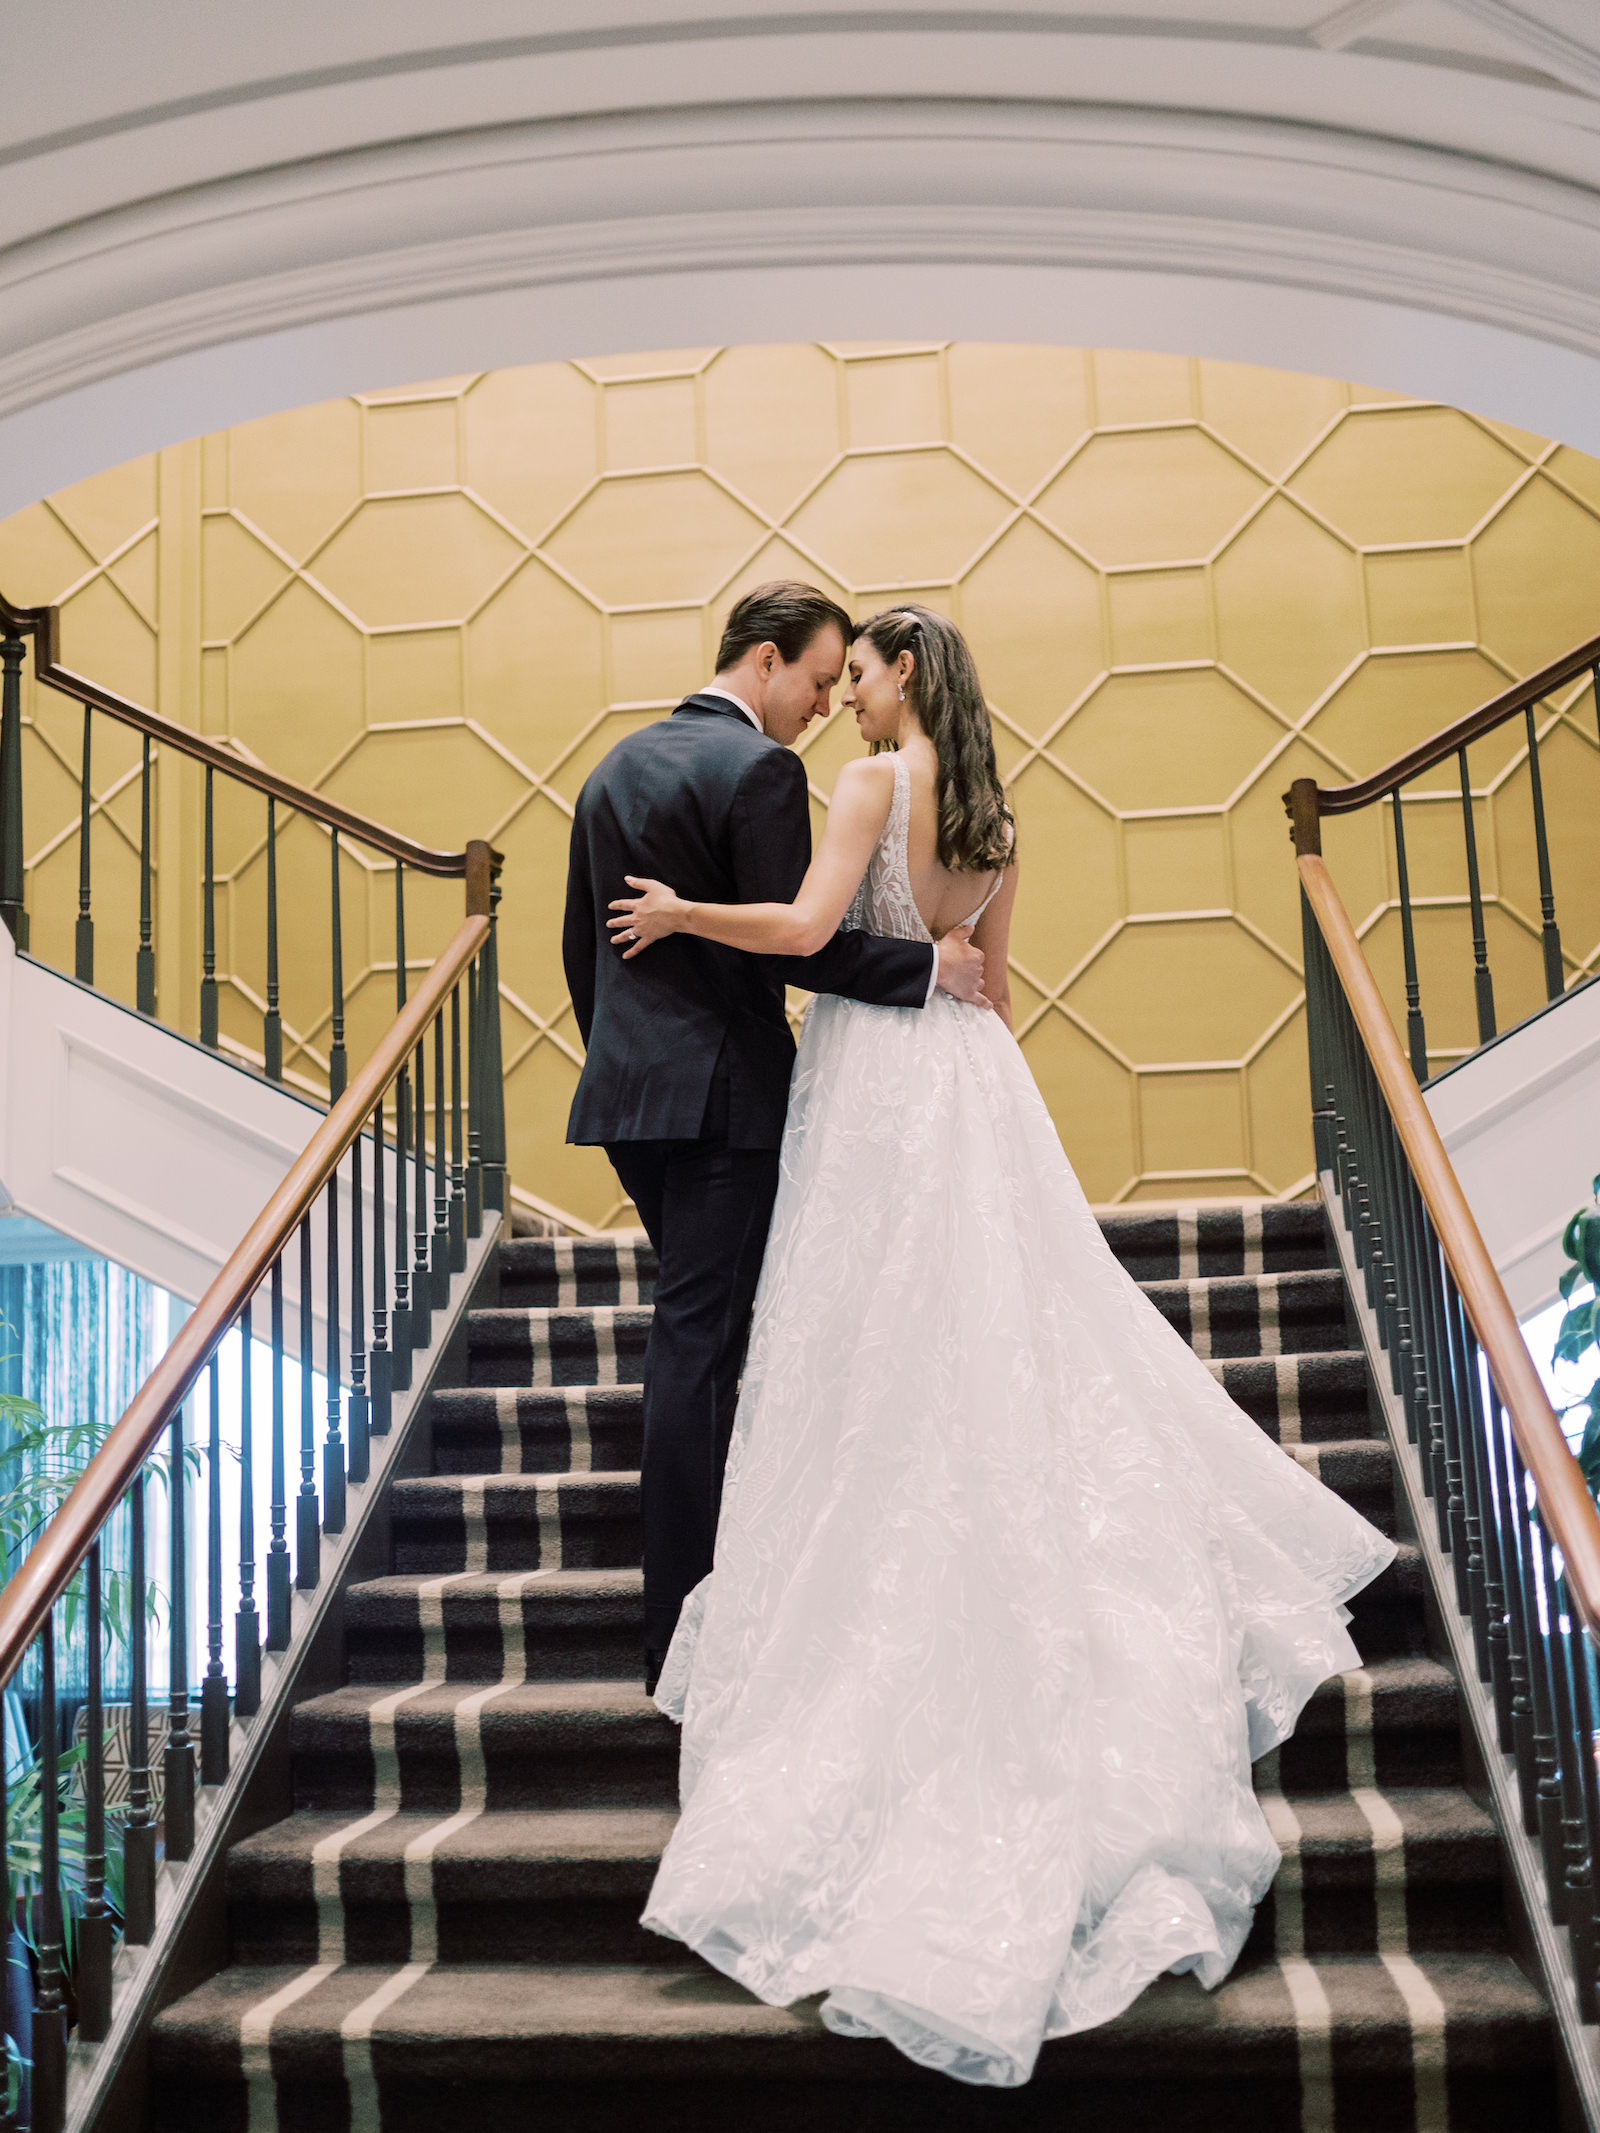 Indoor Bride and Groom Portrait at Downtown Tampa Wedding Venue The Tampa Club Staircase | V Back Embroidered Illusion Panel Allure Couture Designer Wedding Dress Bridal Gown | Groom in Classic Black Suit Tux with Bow Tie